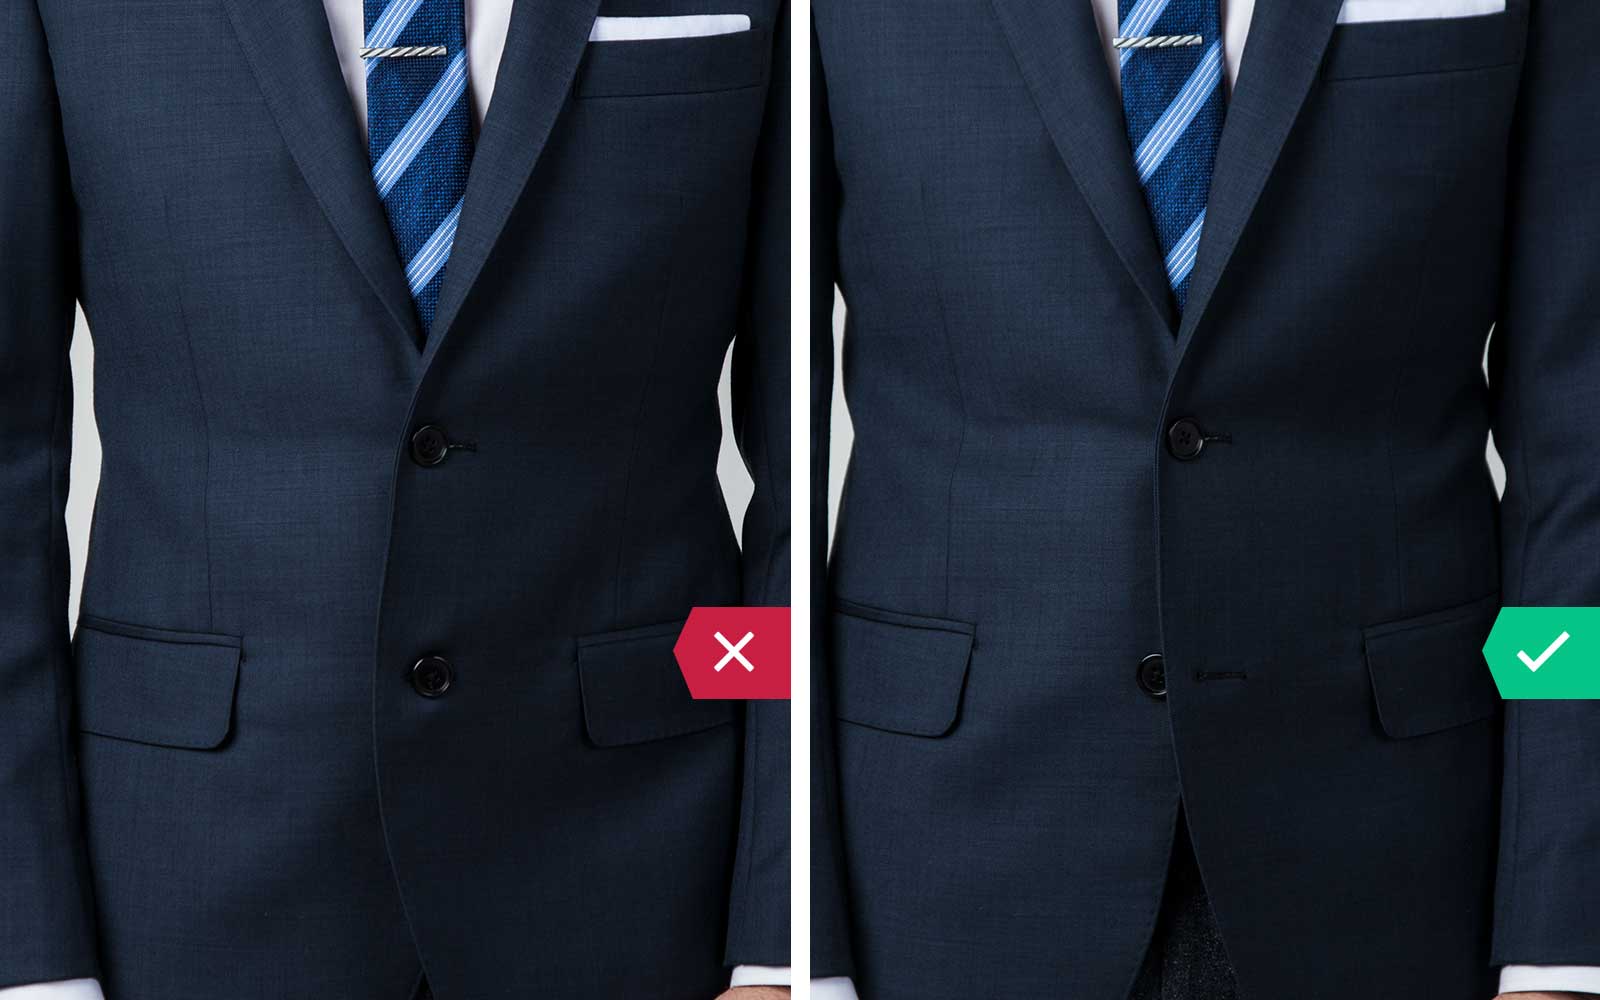 15 Style Mistakes Most Men Make - The GentleManual